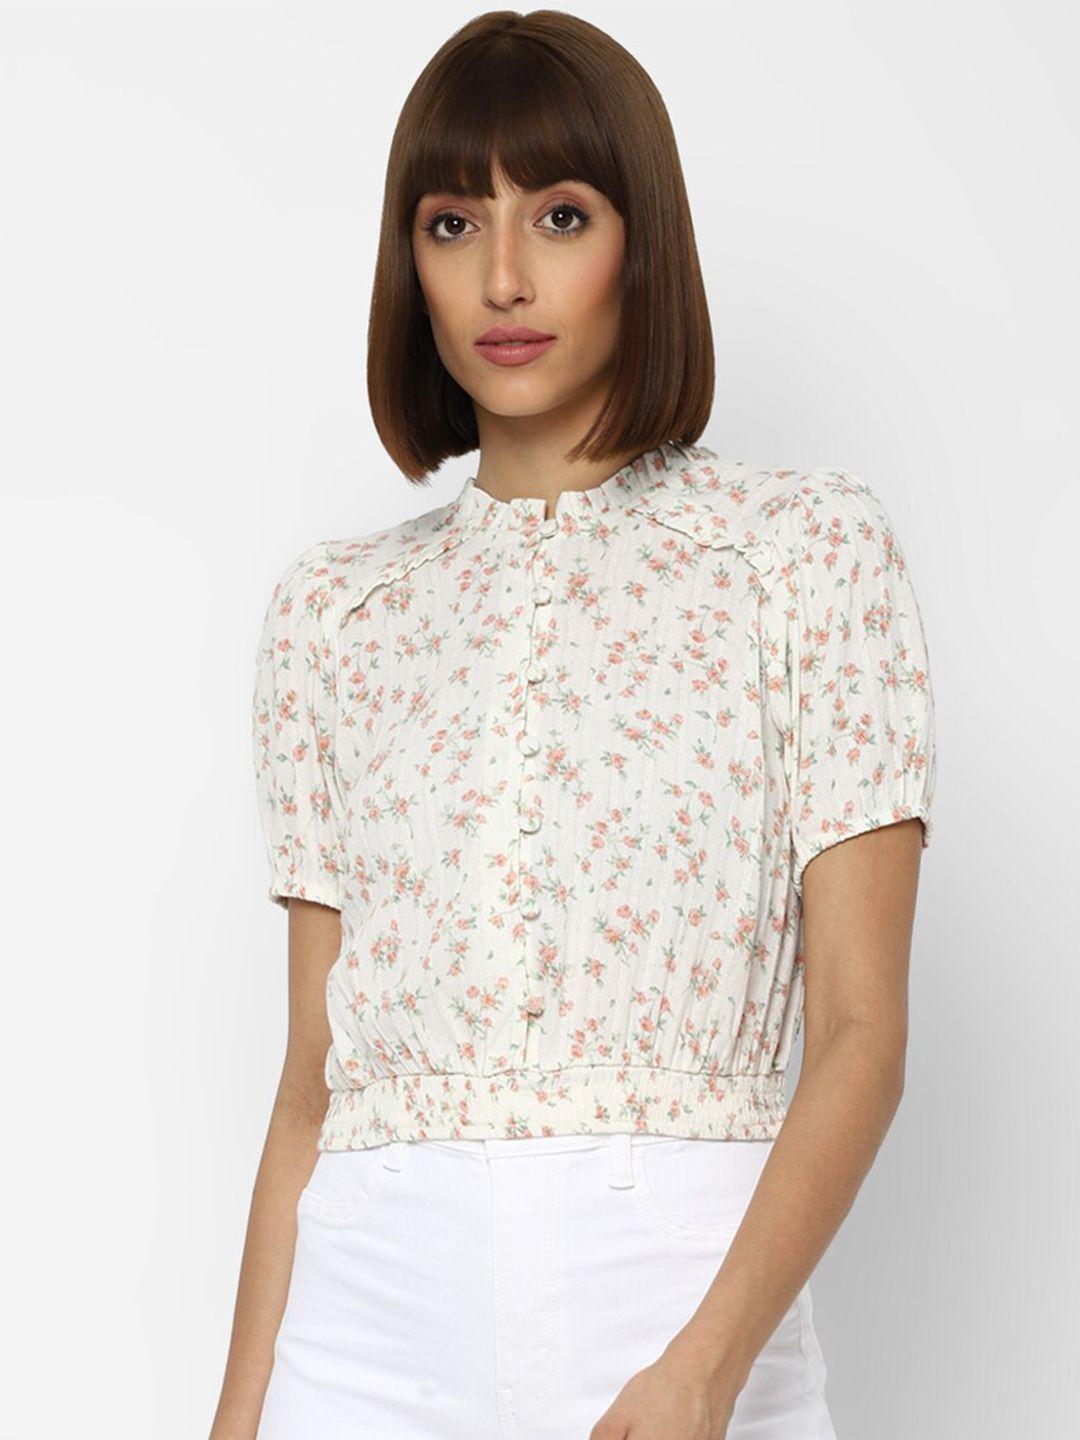 american eagle outfitters beige floral shirt style top